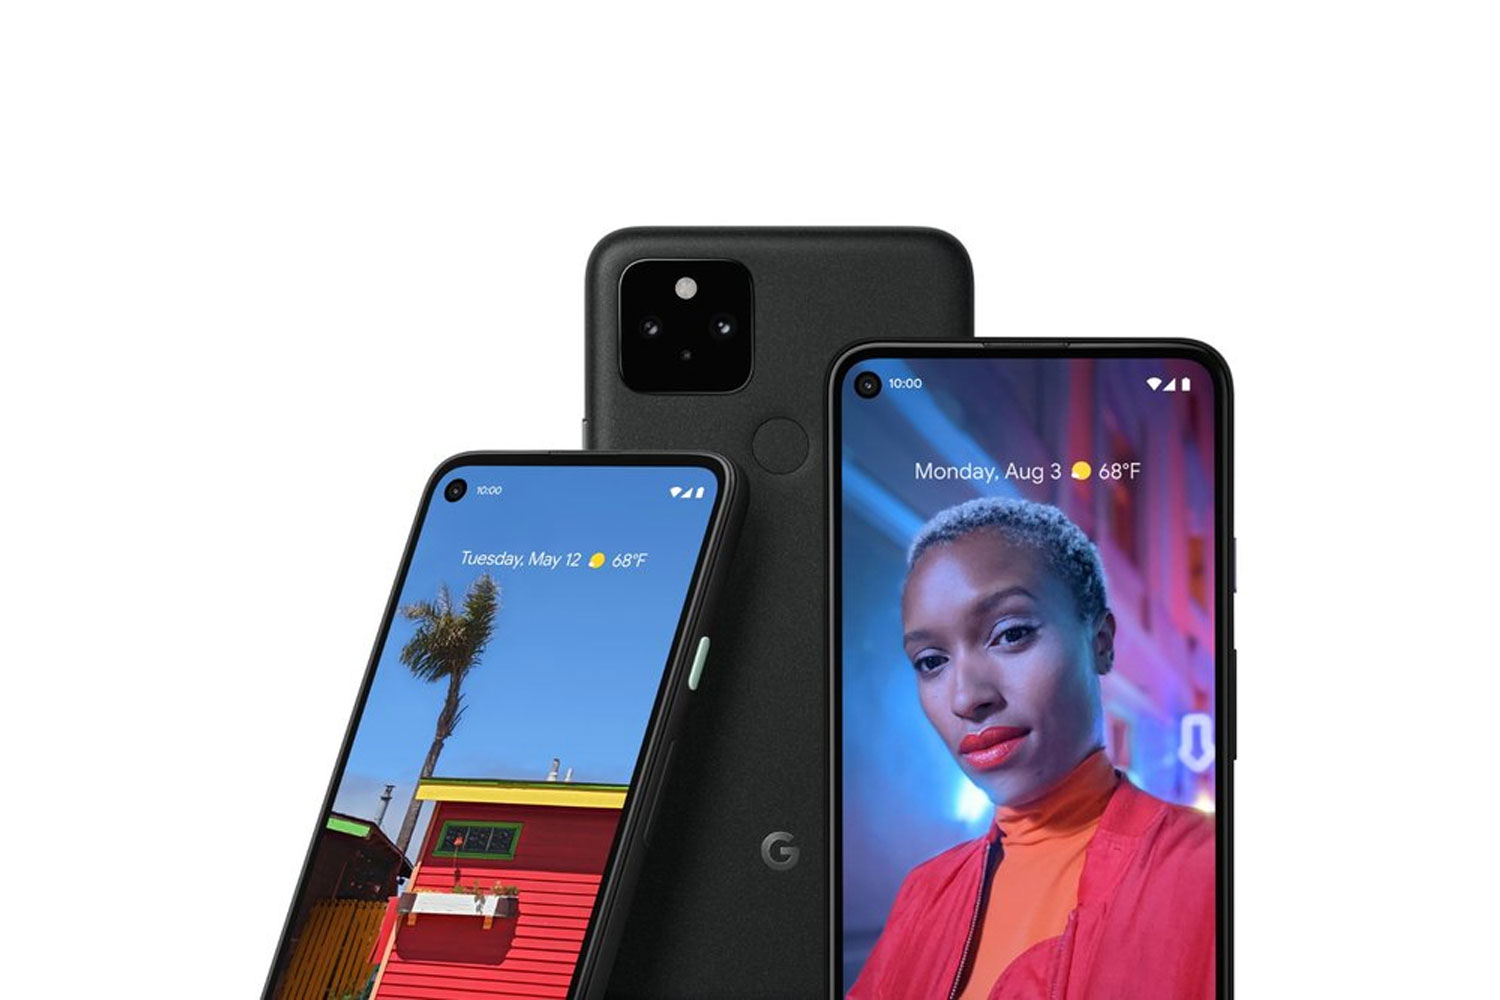 Google Pixel 5 and Pixel 4a (5G) Officially Announced